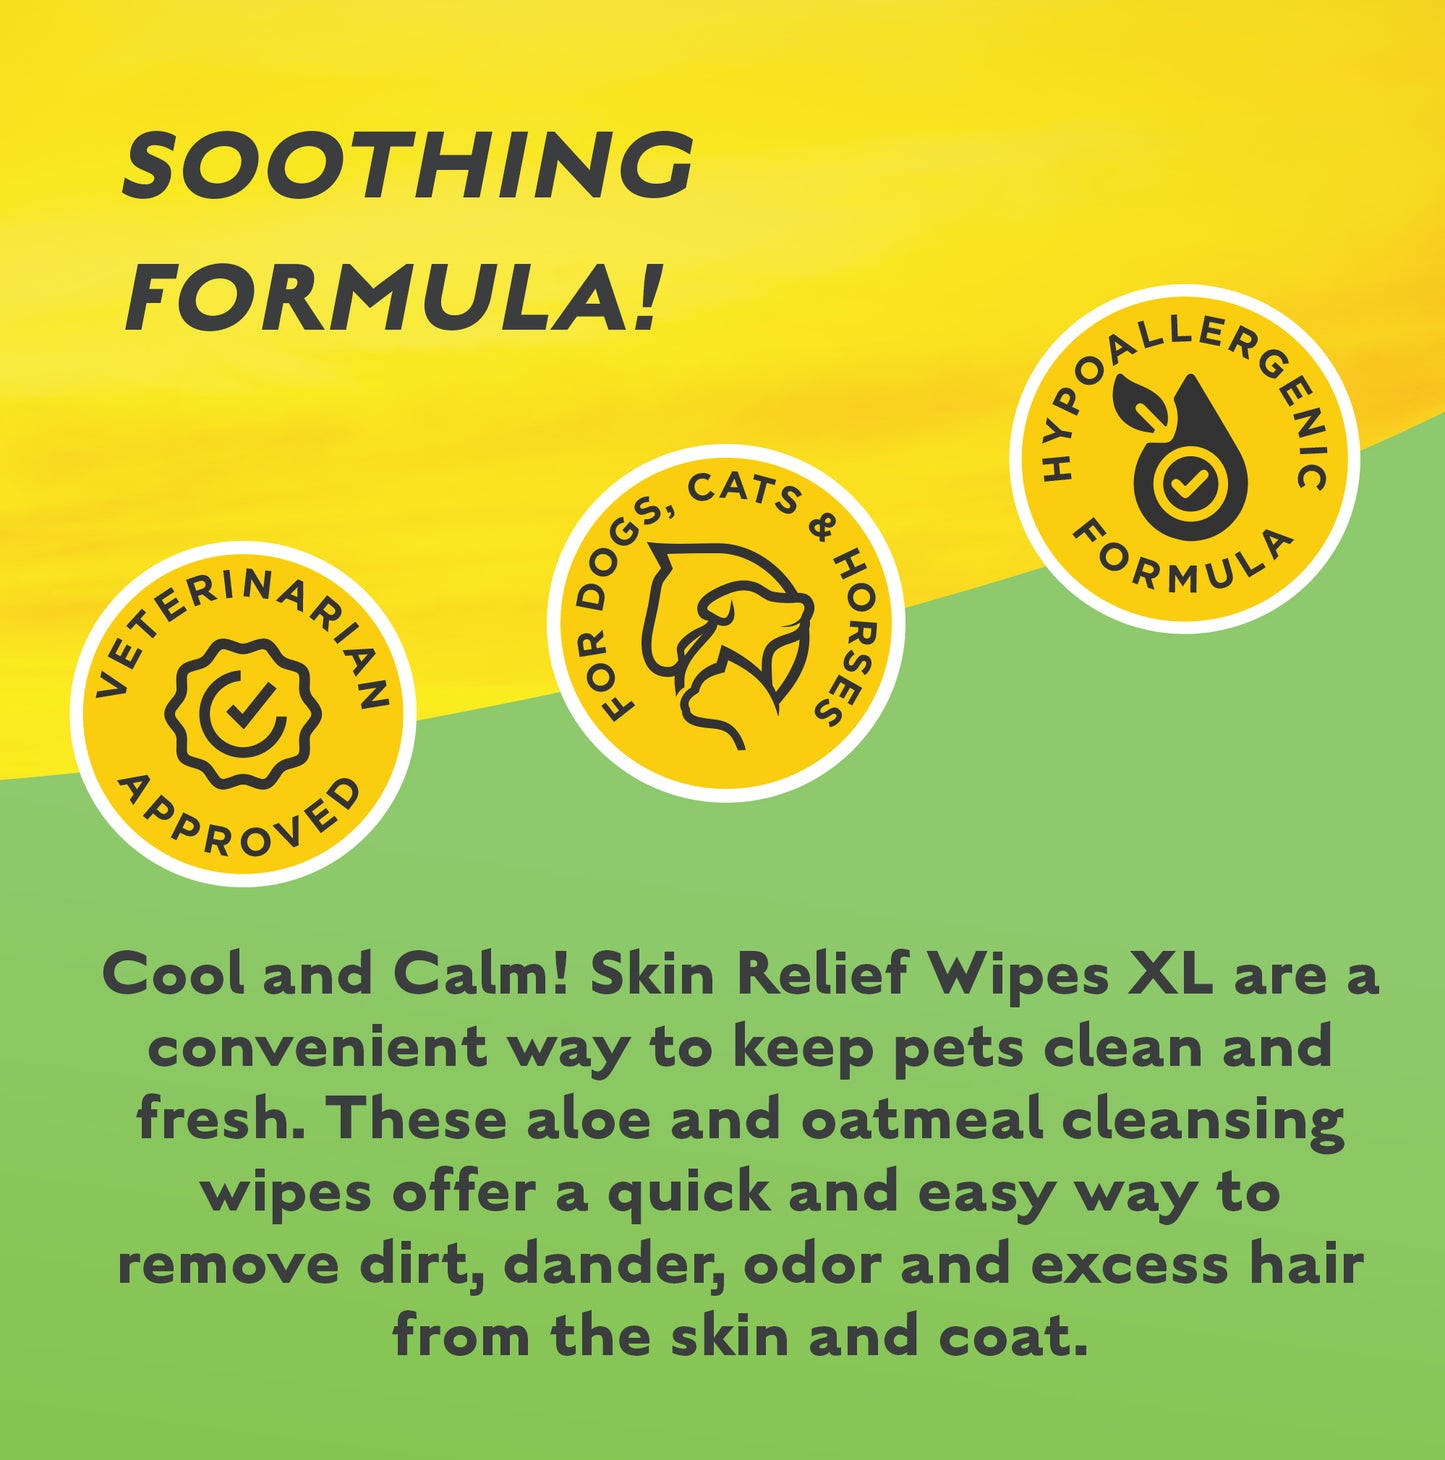 GROOMING/WIPE- Cool & Calm! Skin Relief Wipes XL